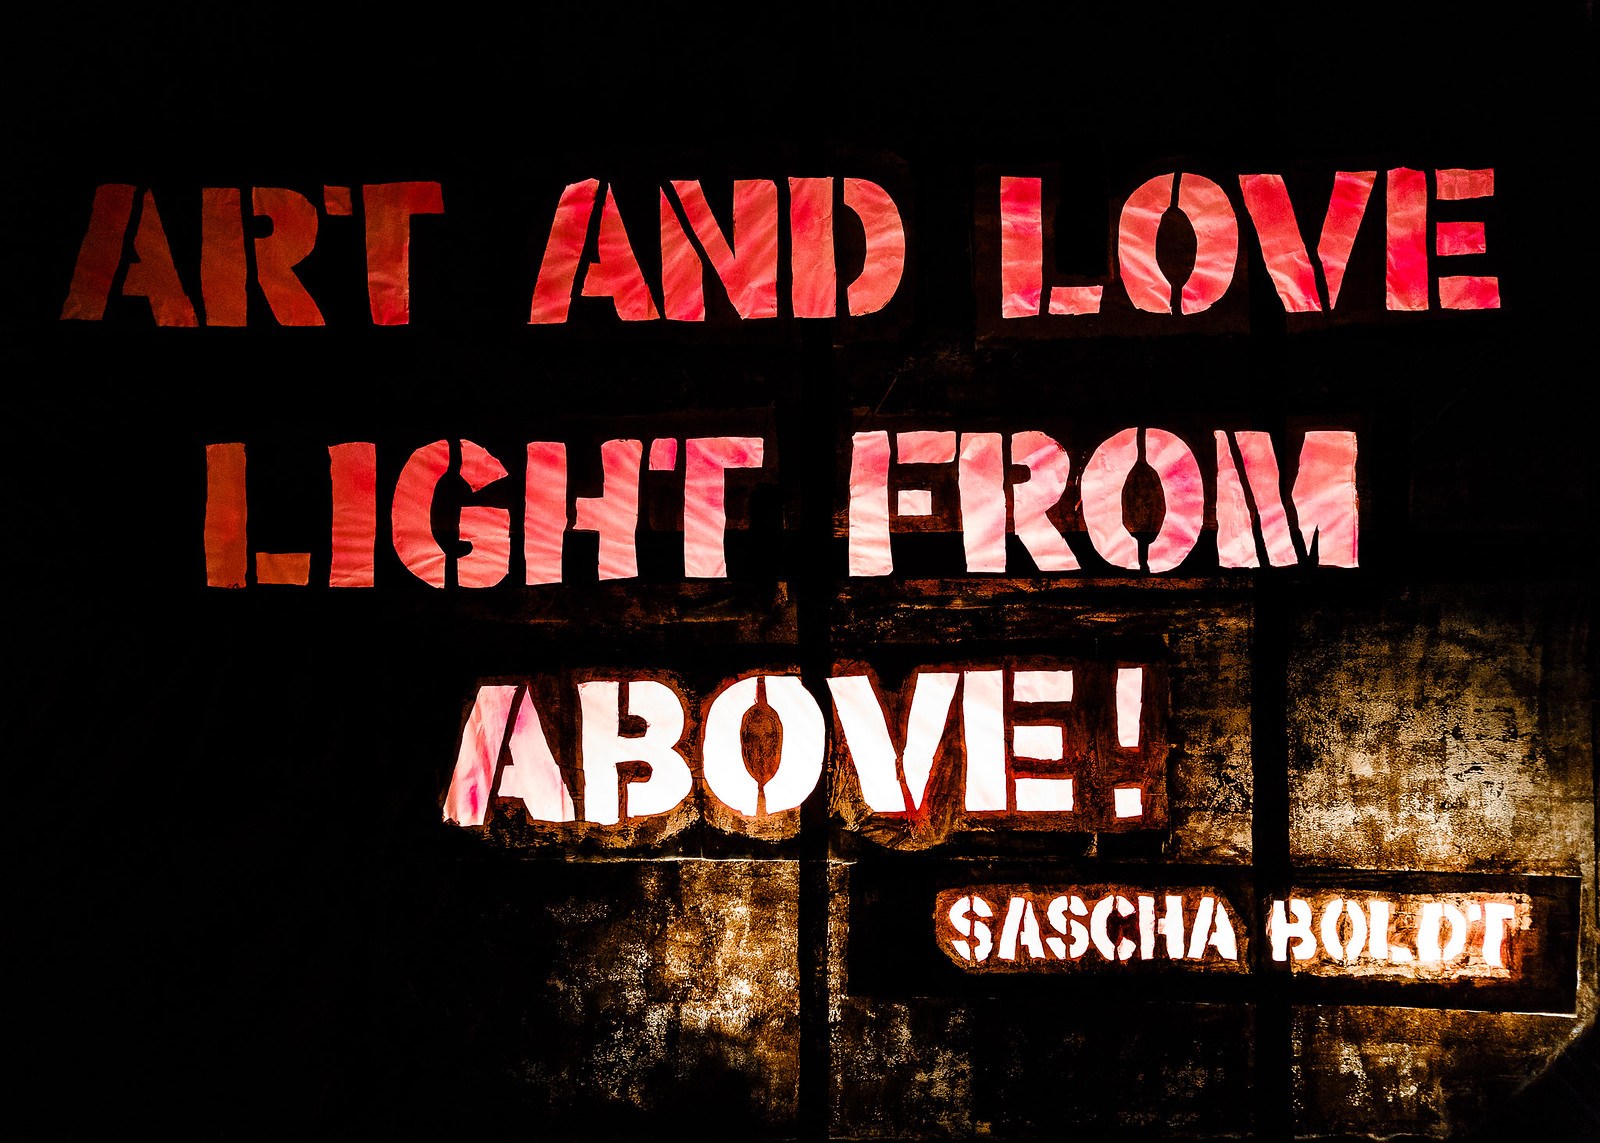 Art and love - light from above